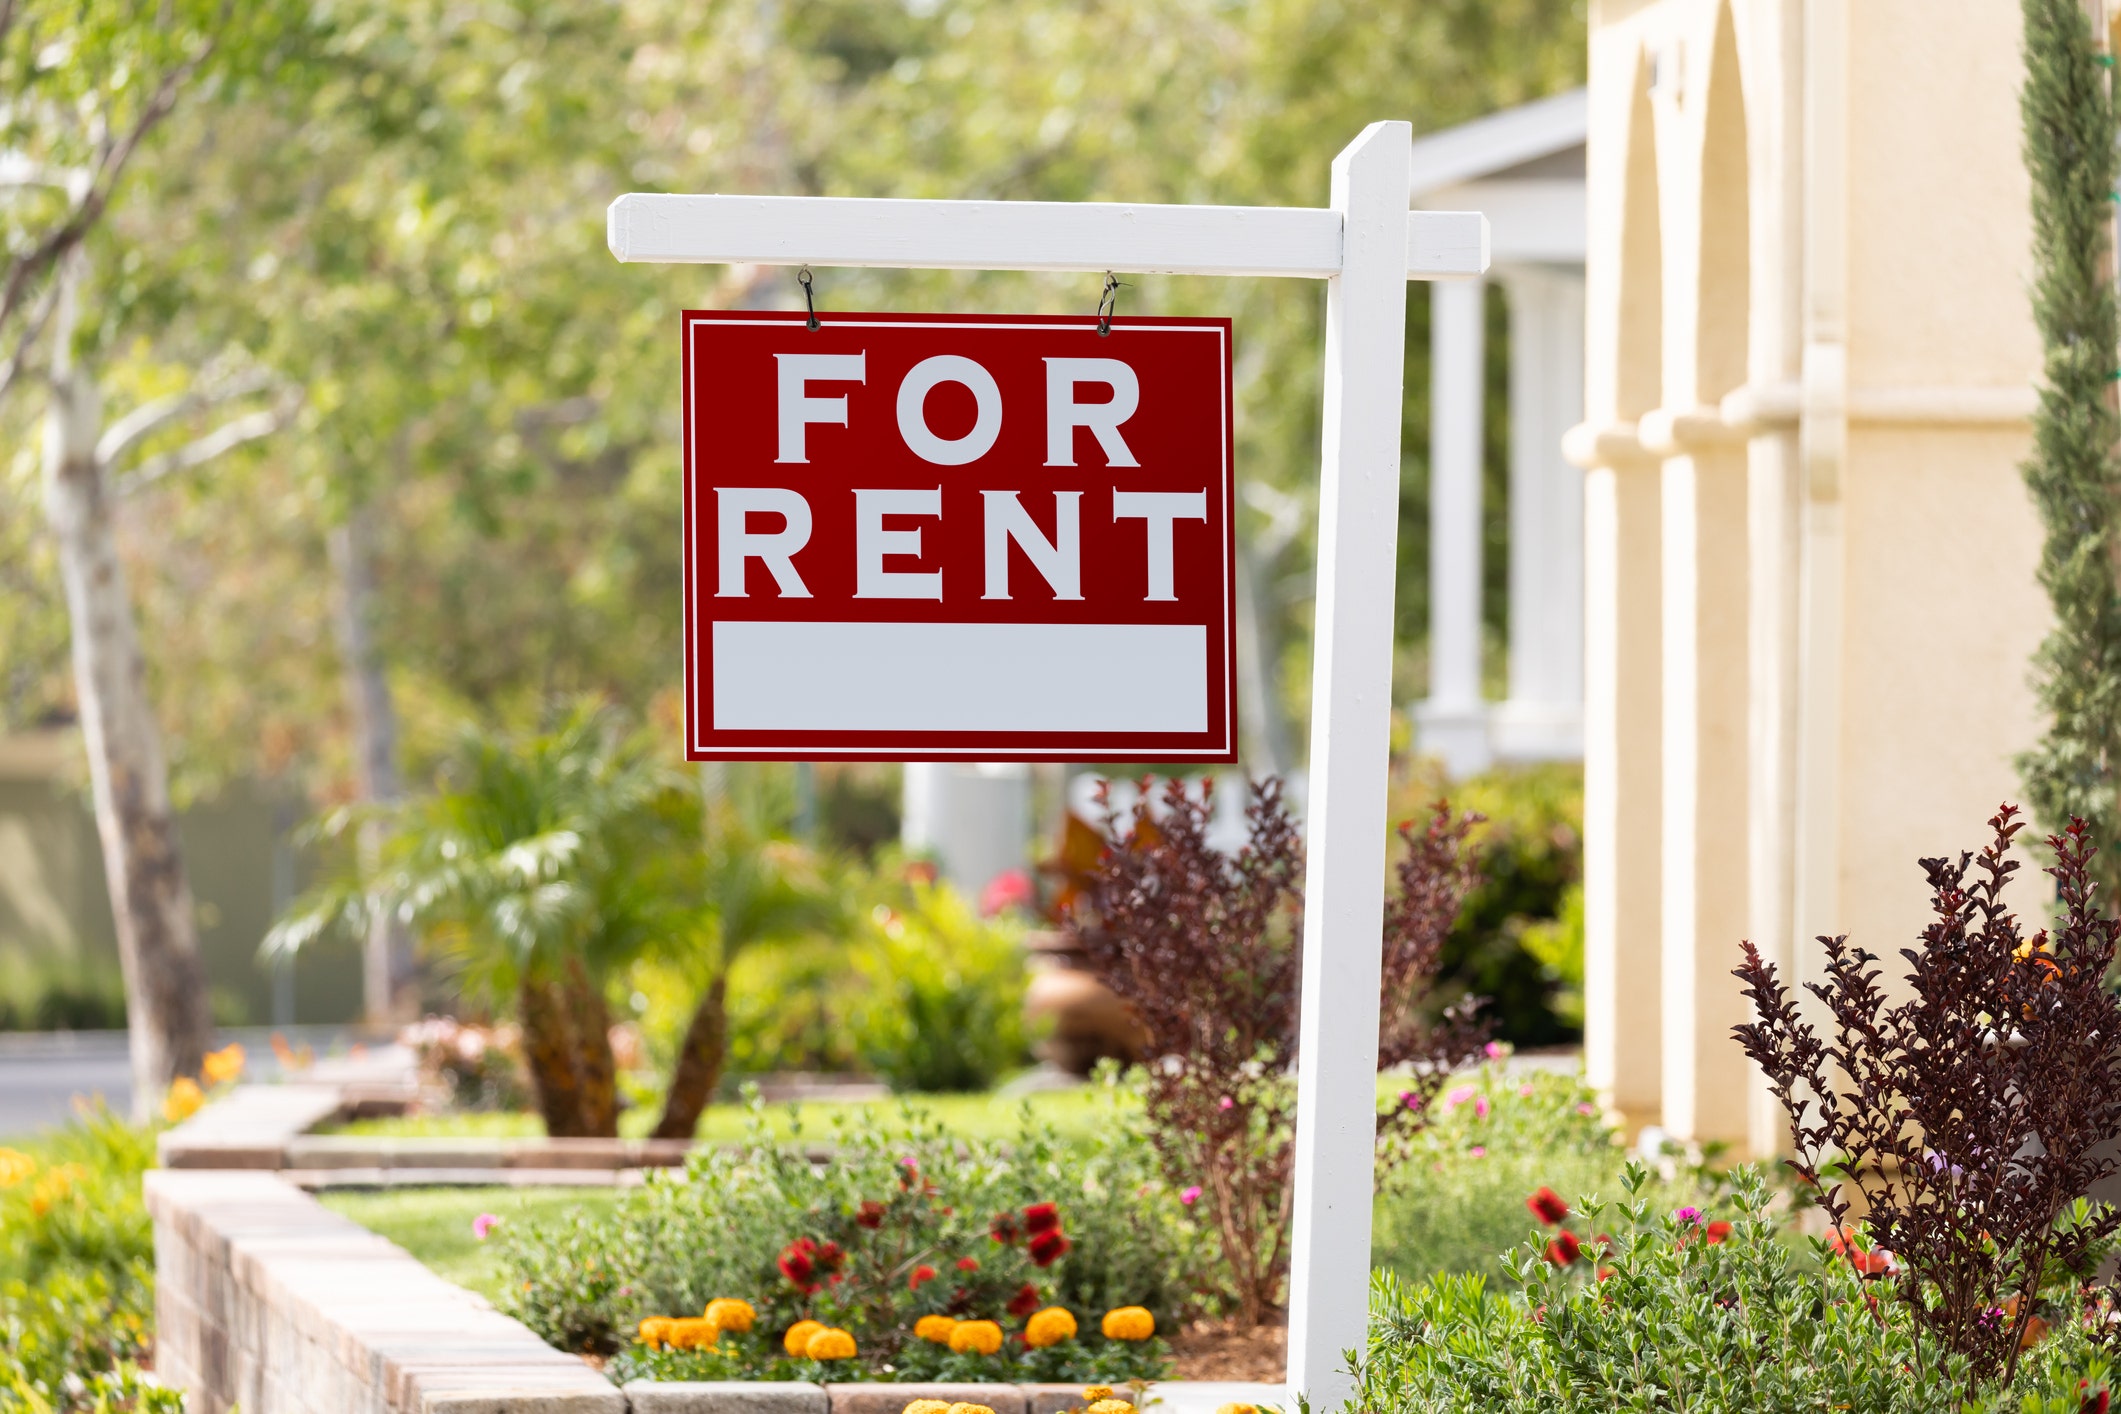 Rent payments are higher than mortgages in these cities